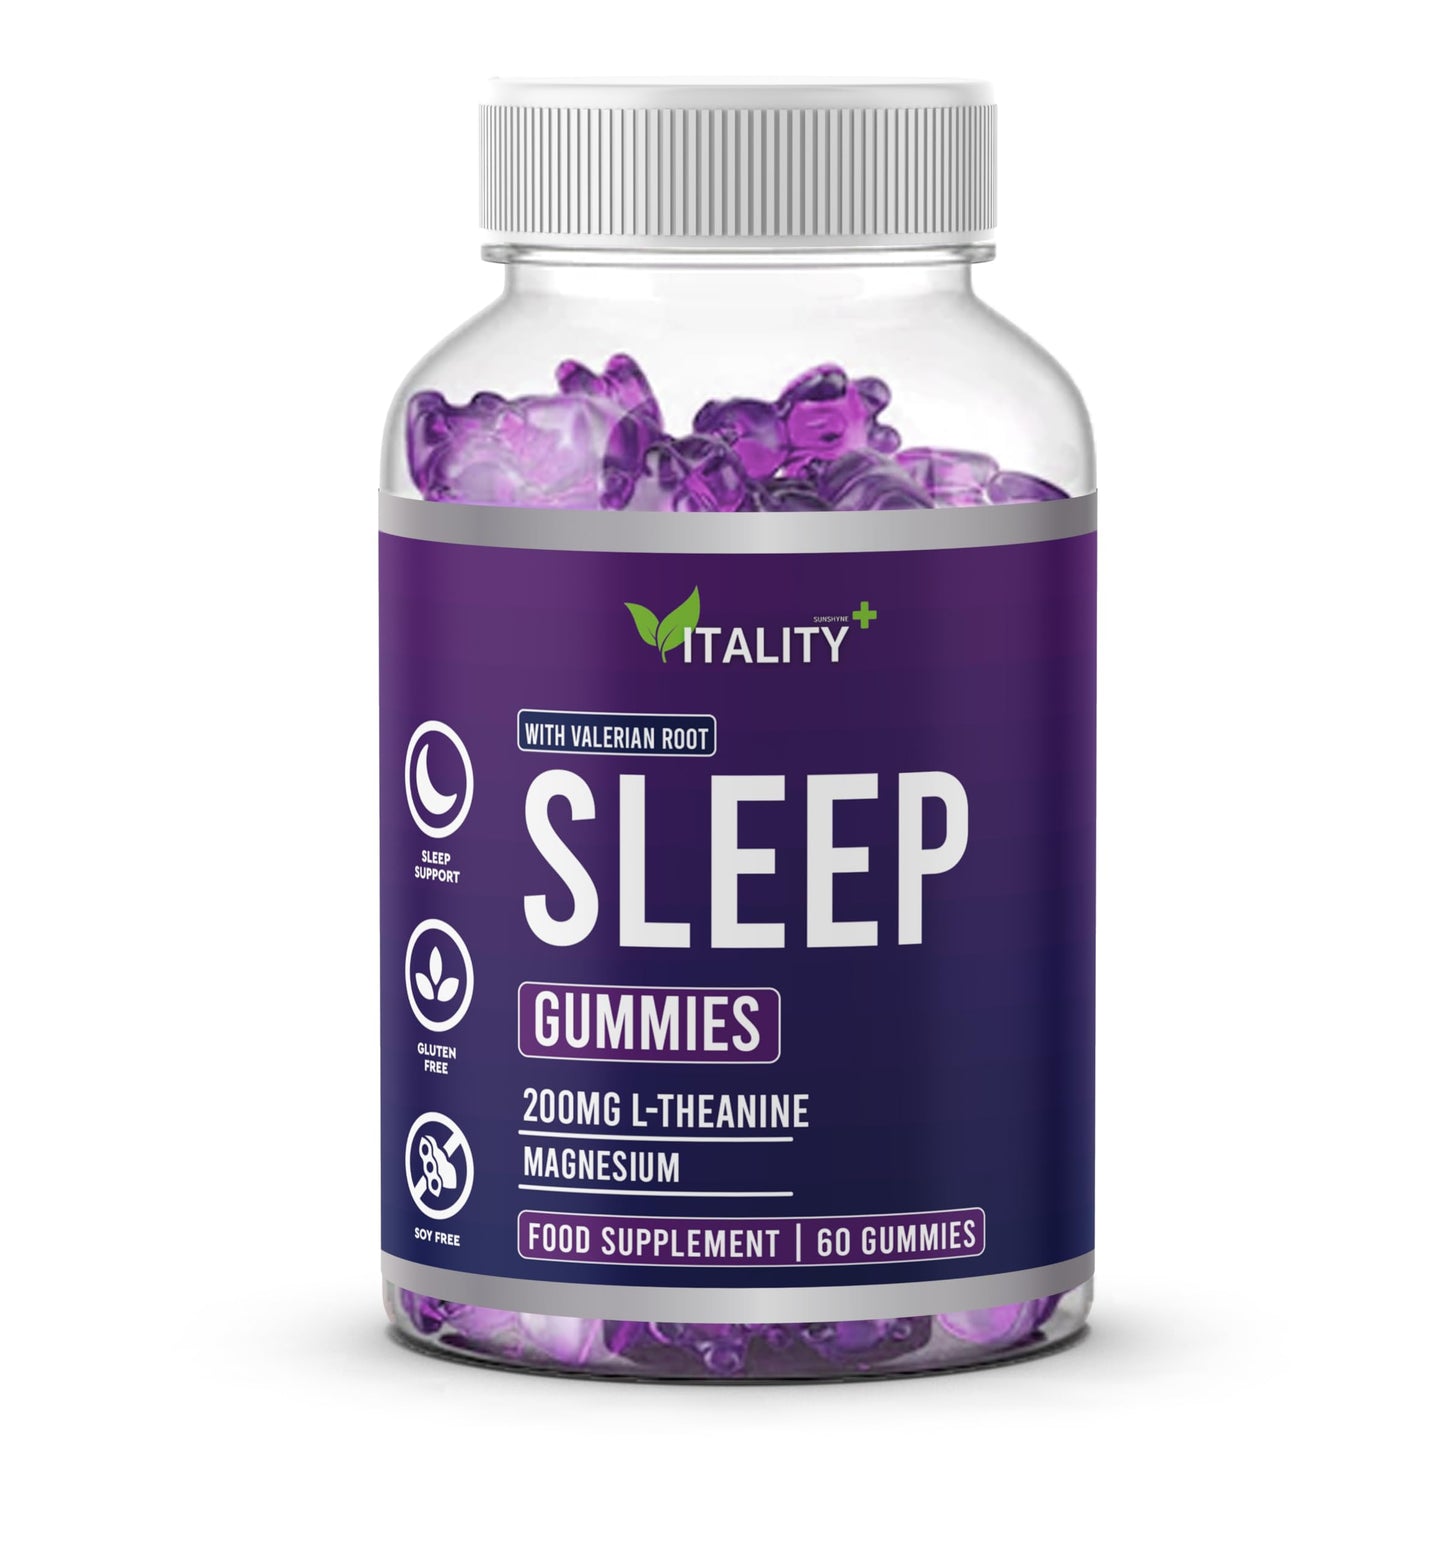 Natural Sleep Aid Gummies with Valerian Root & L-Theanine - Non-Habit Forming, Vegan, for Deep Relaxation & Restful Nights - 60 Chewable Gummies